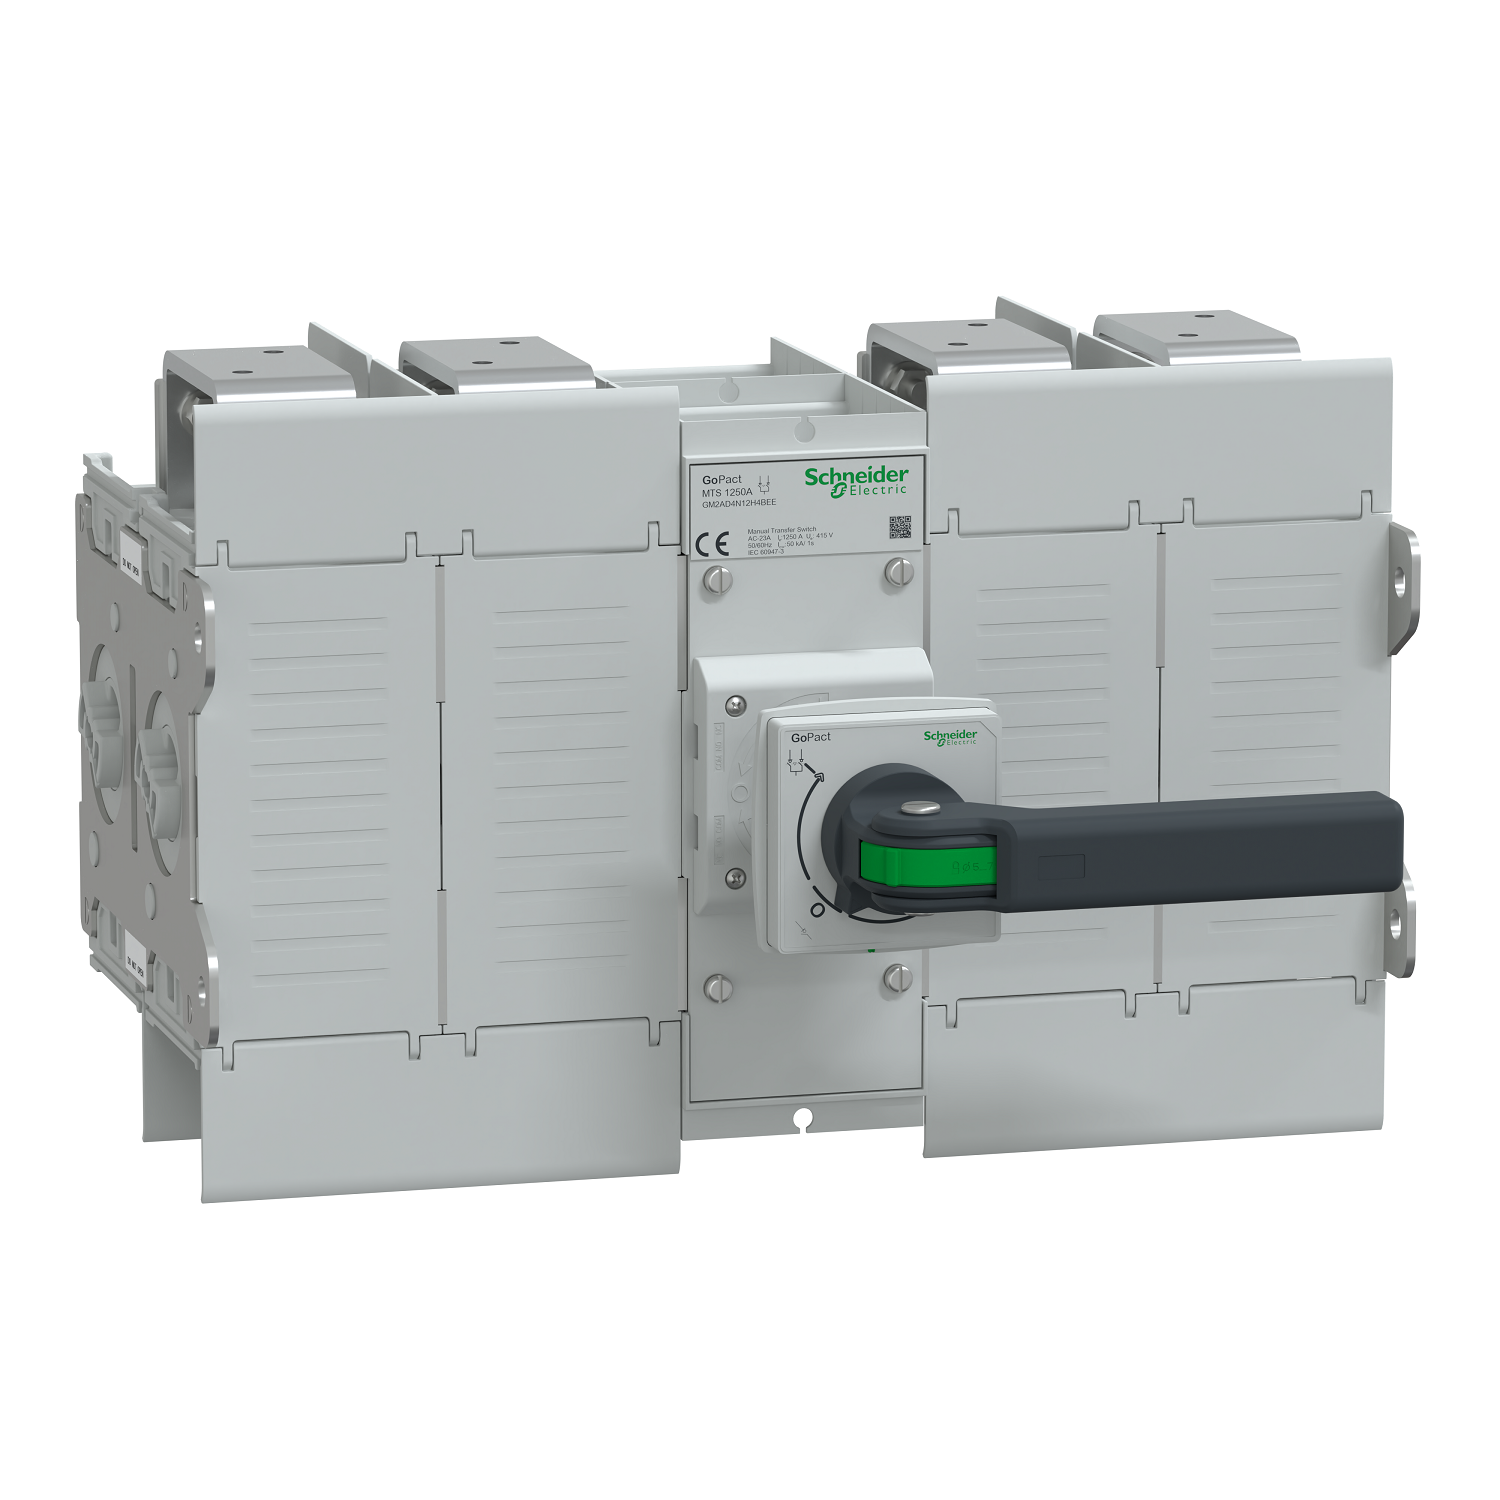 Manual transfer switch, GoPact MTS 2000, 4 poles, 1250A, 415VAC 50/60Hz, extended rotary handle, open transition